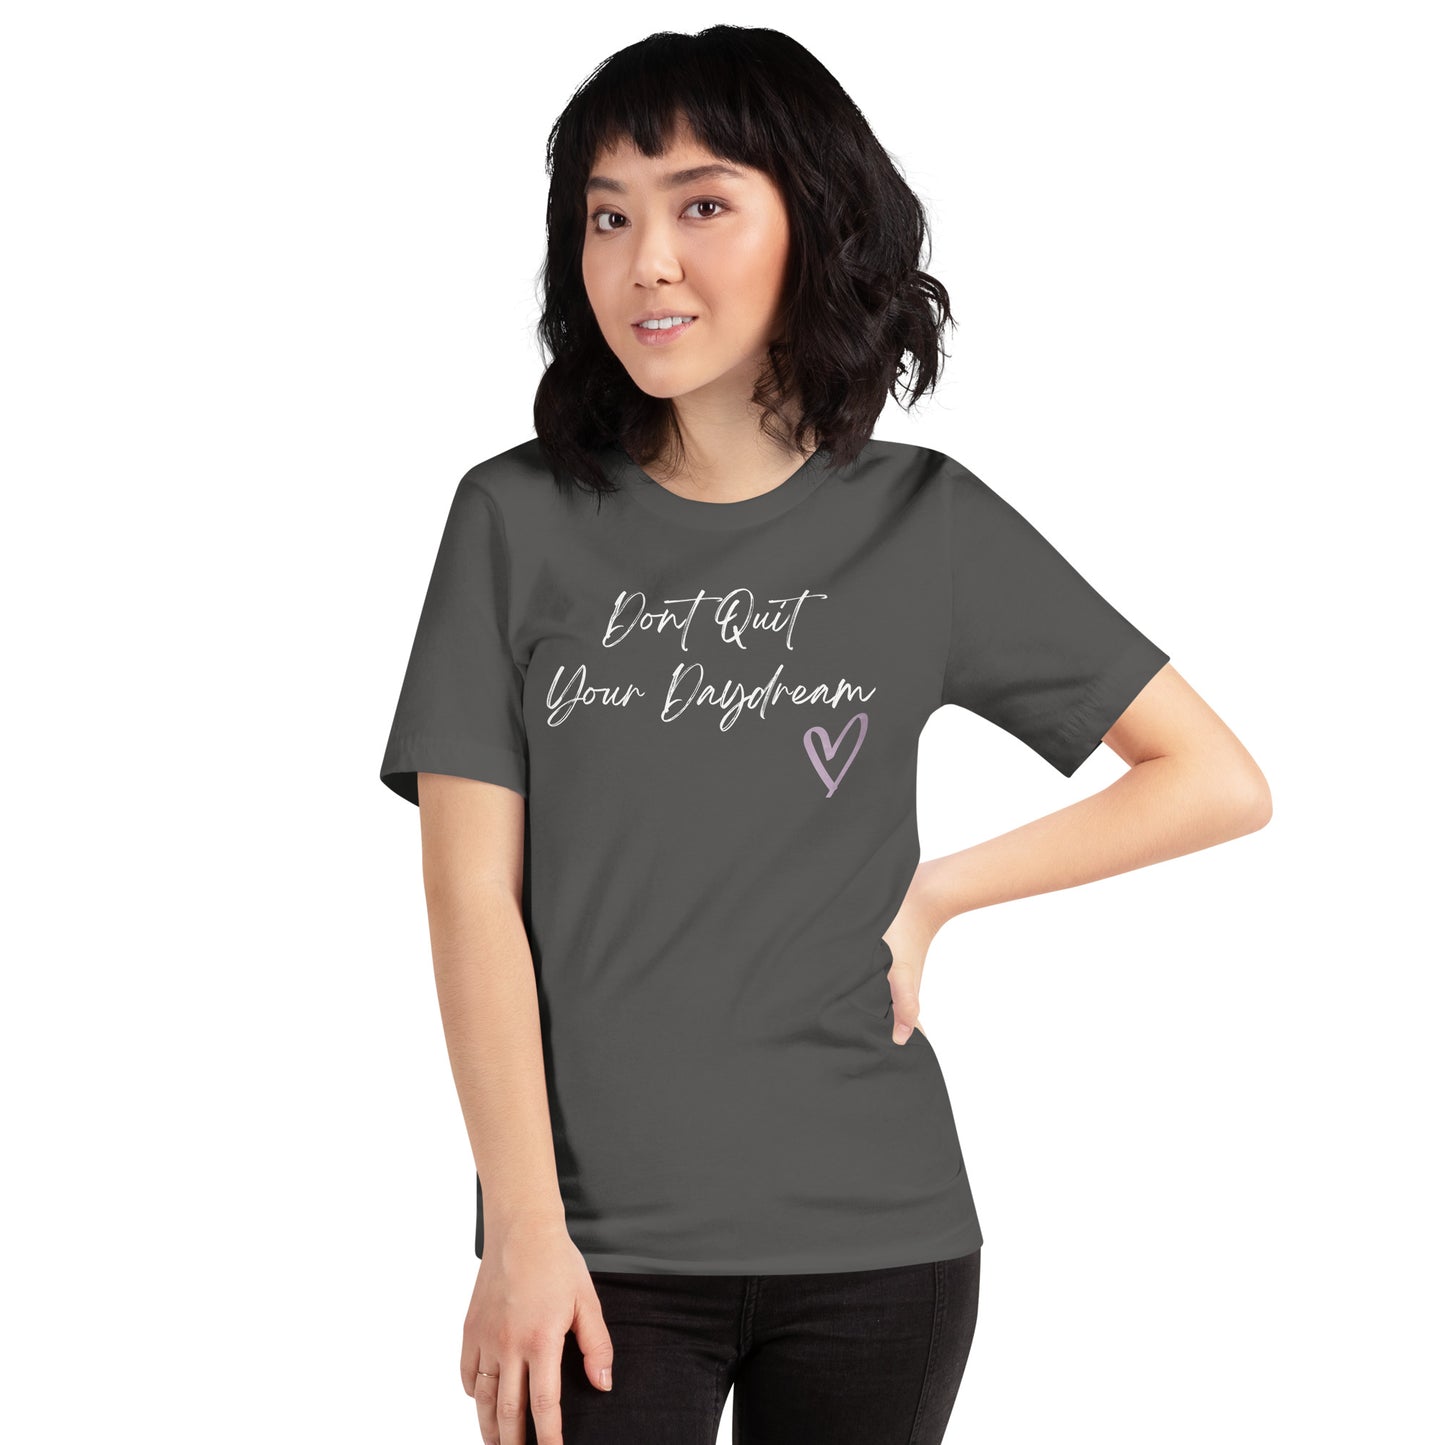 Don't Quit Your Daydream T-shirt